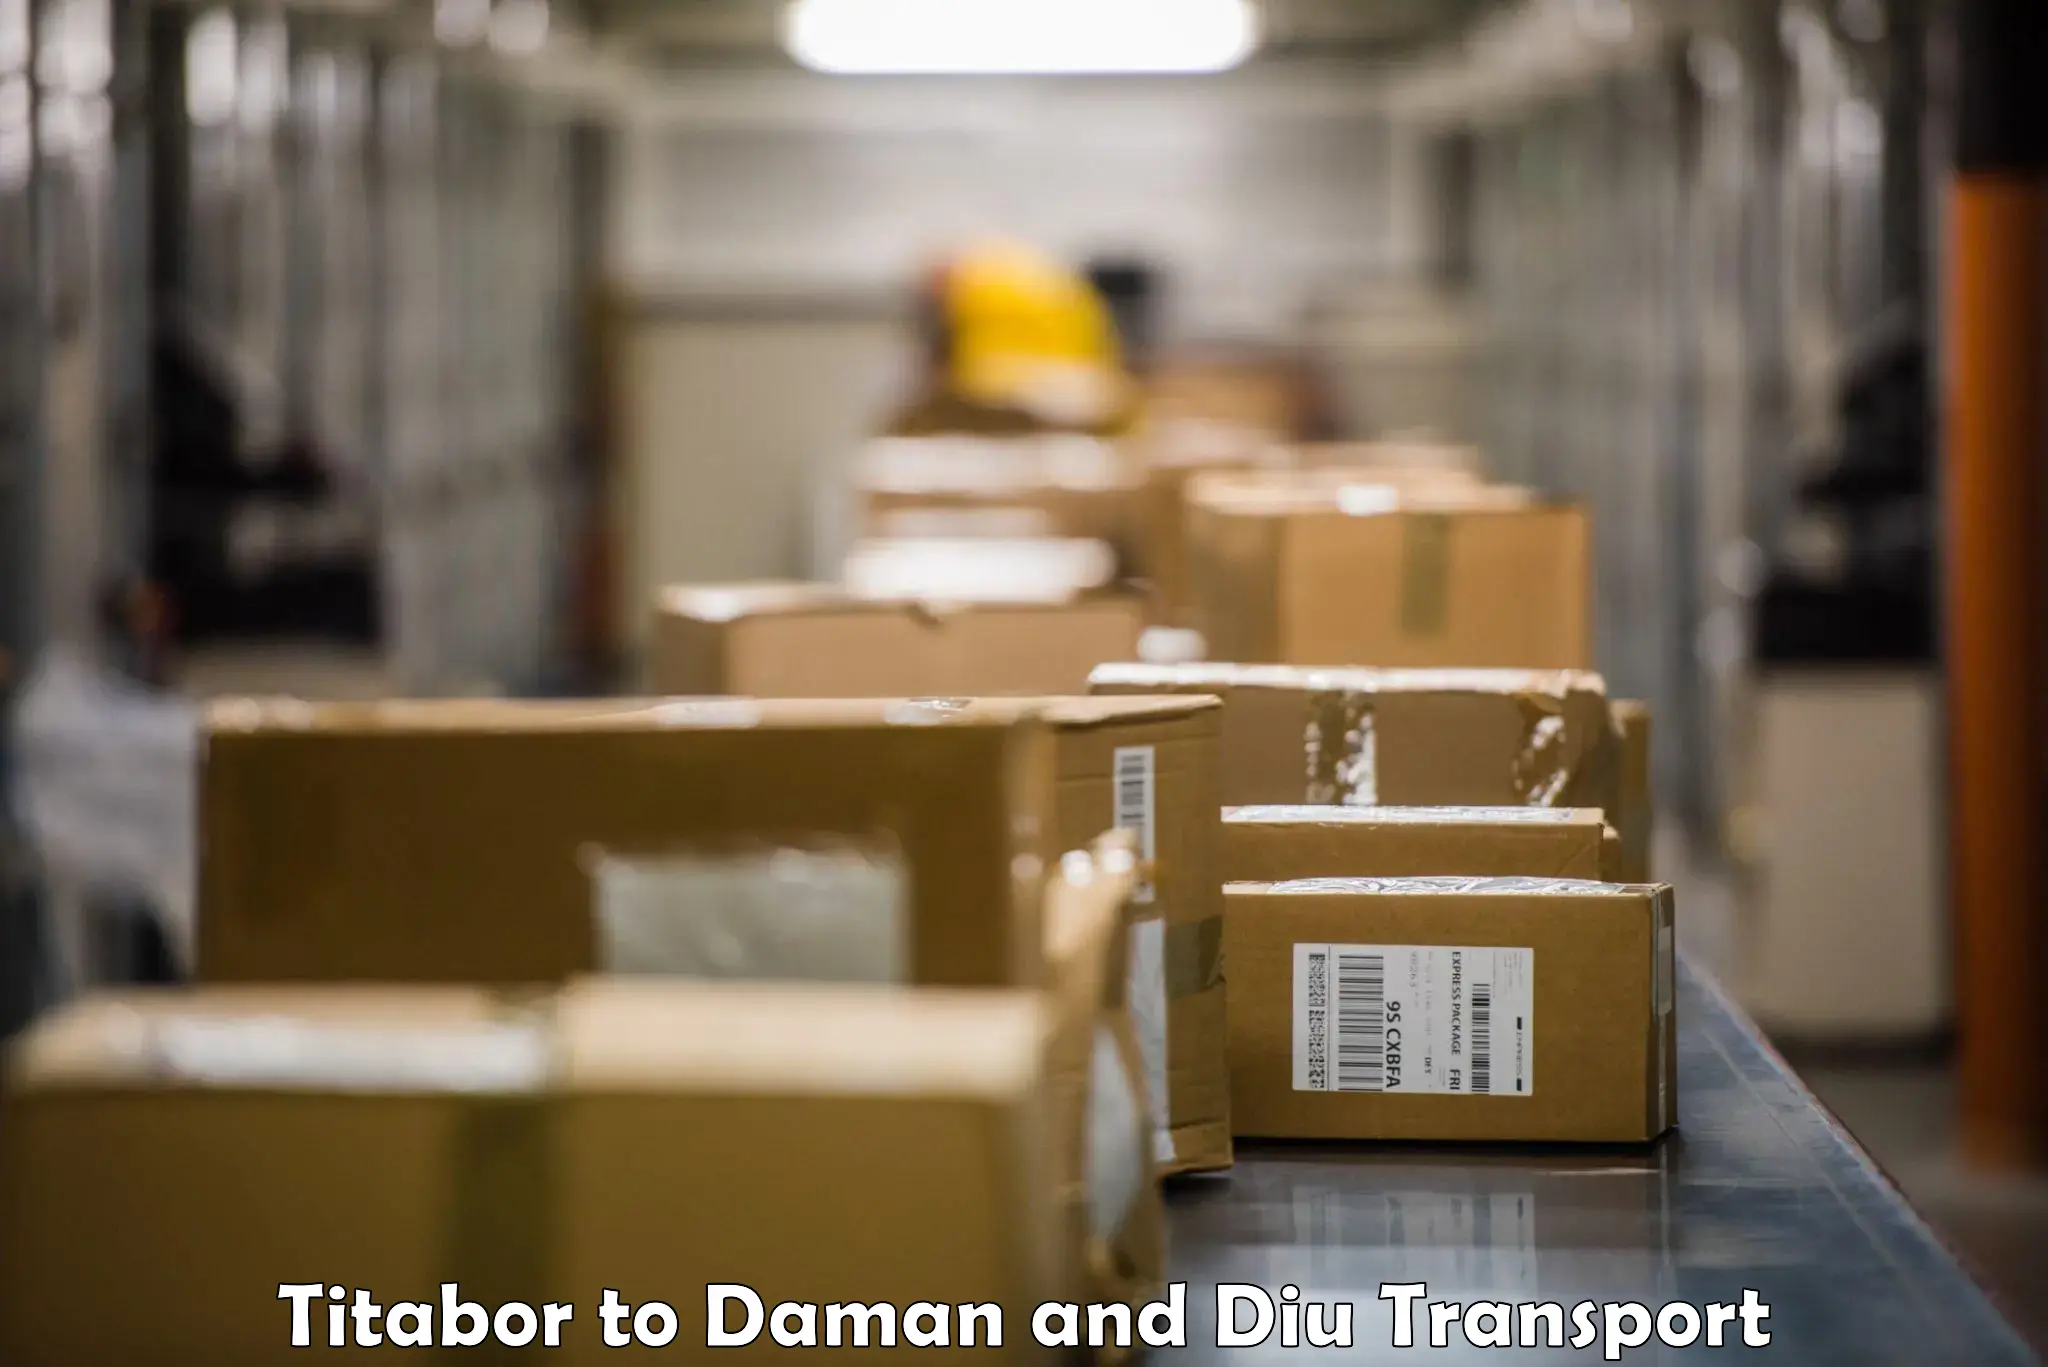 Daily parcel service transport Titabor to Daman and Diu